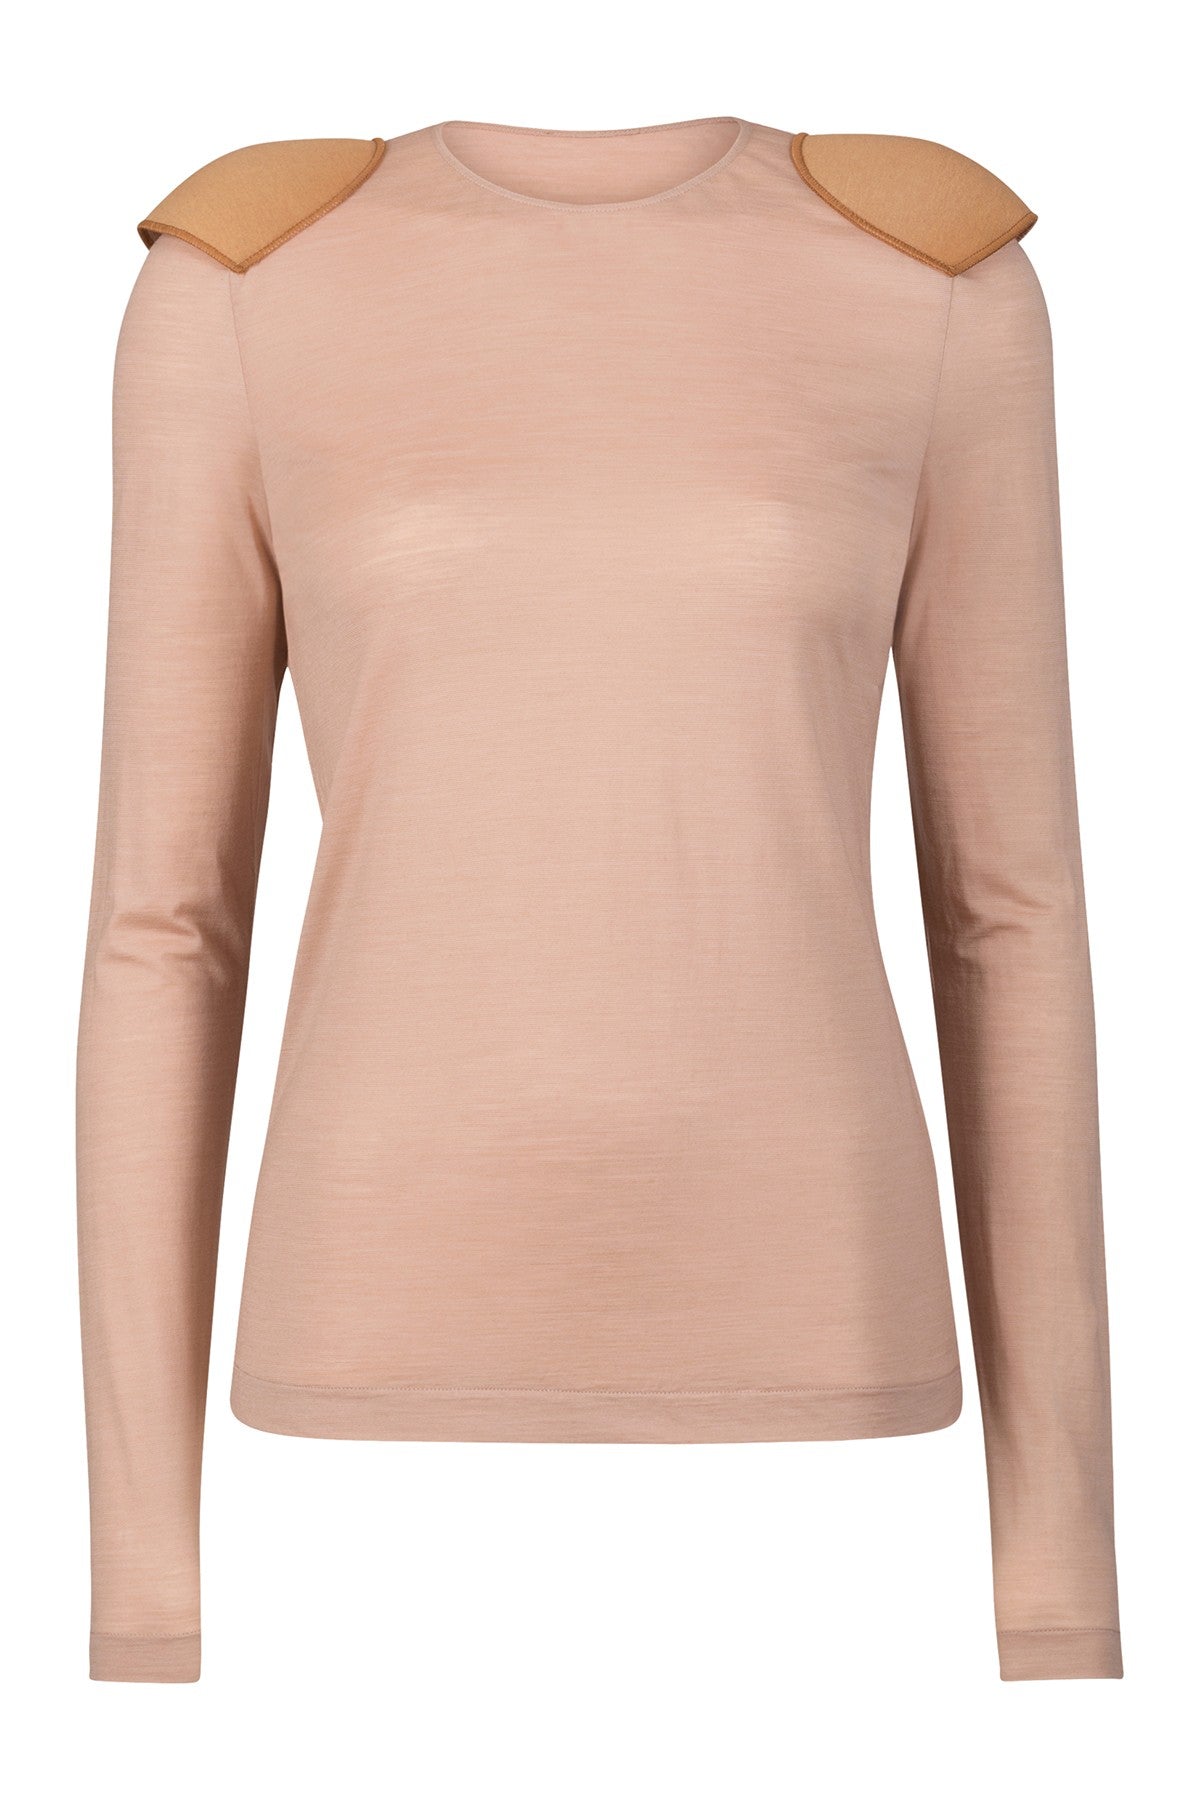 Wolford Rocket Moon Pullover - XS